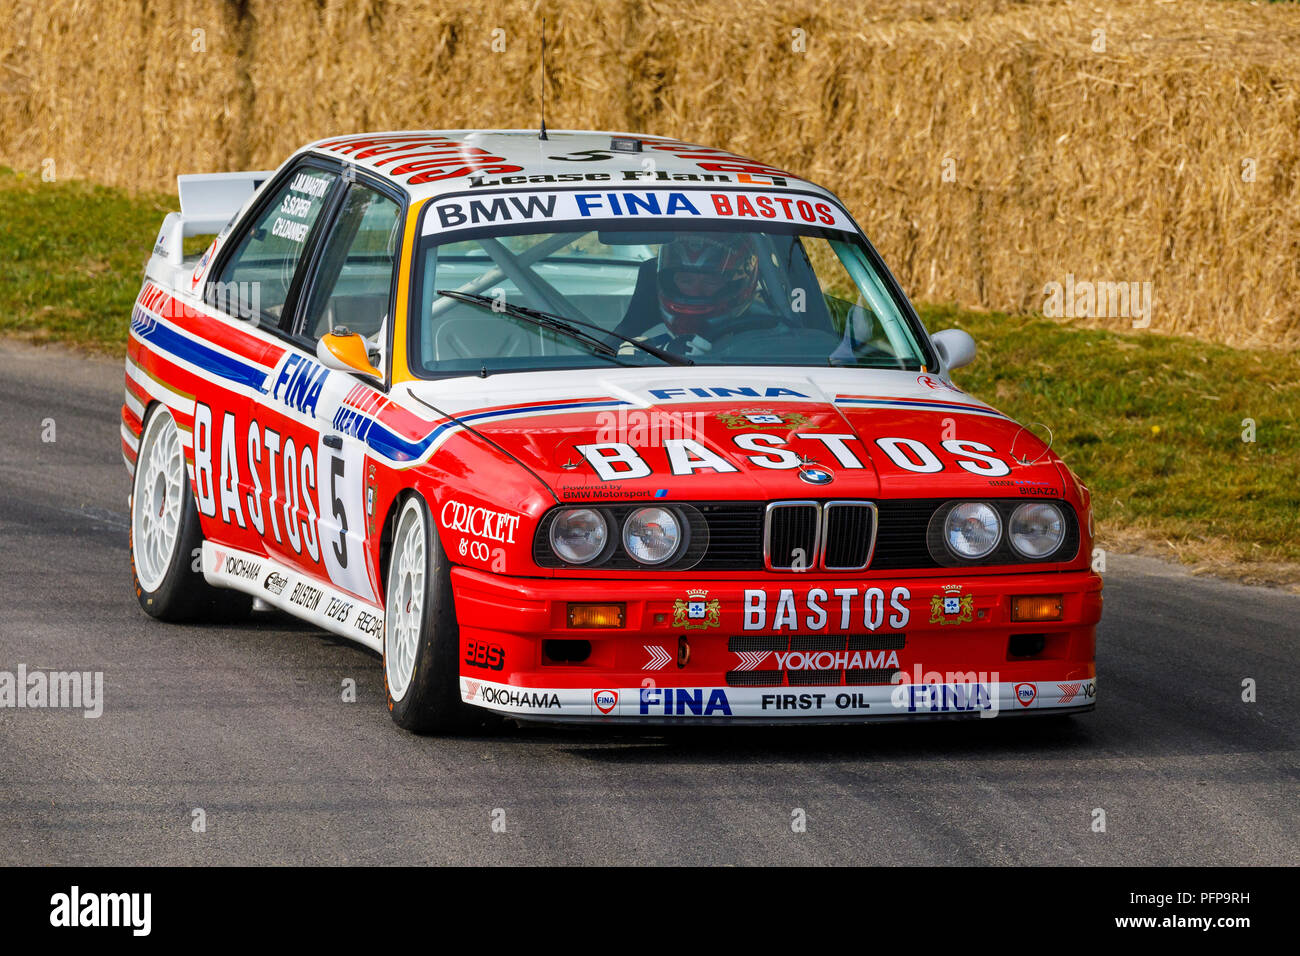 1991 Bmw M3 0 Wtcc Entrant With Driver Steve Soper At The 18 Goodwood Festival Of Speed Sussex Uk Stock Photo Alamy